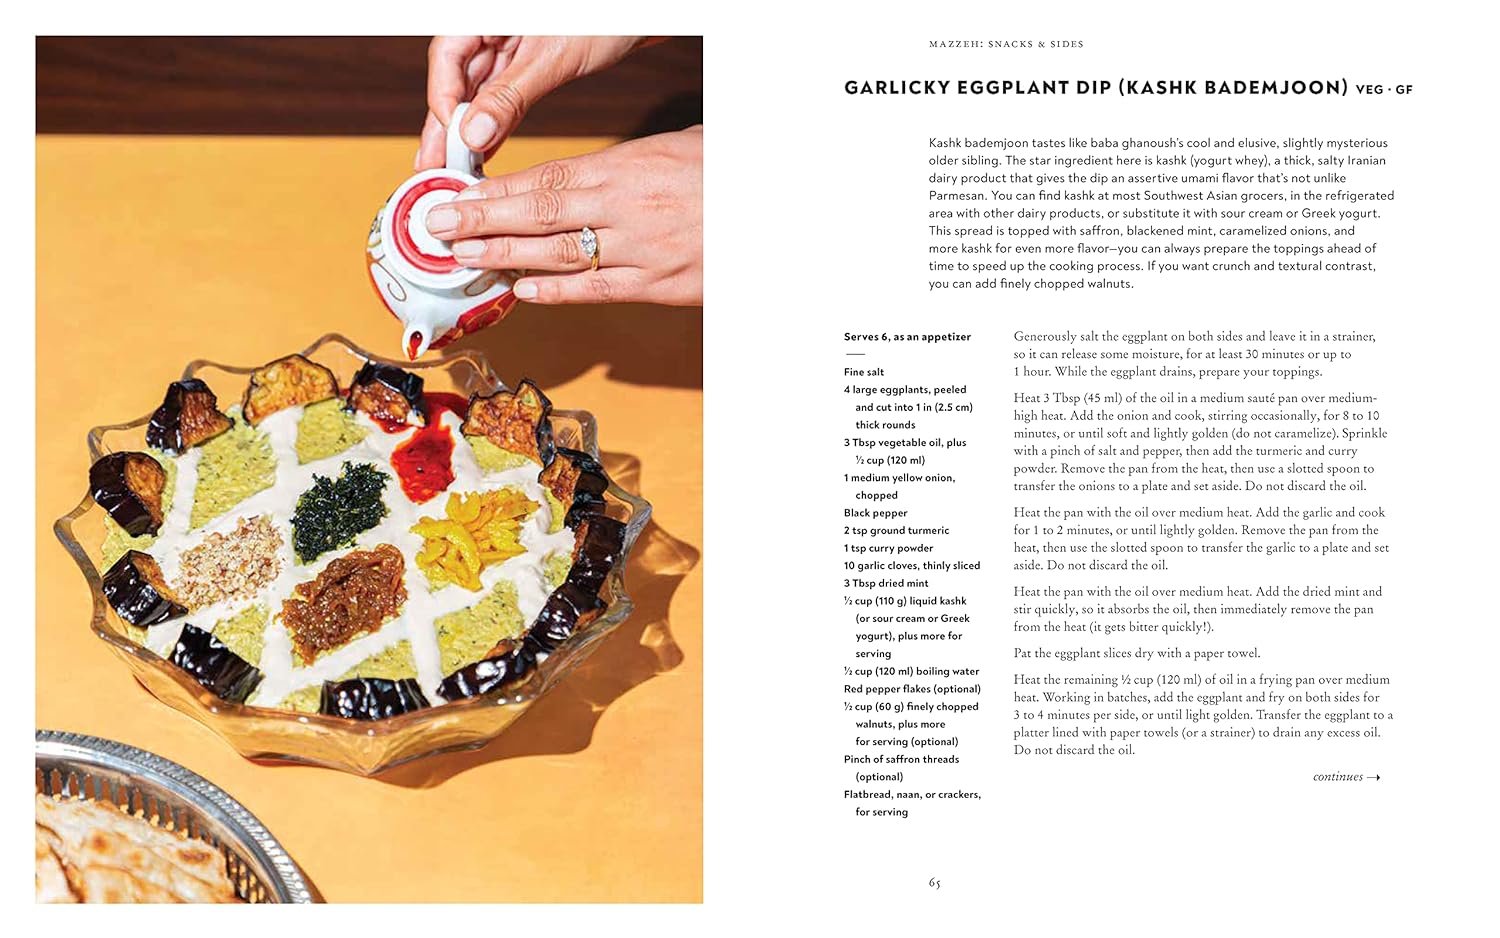 Maman and Me is a gorgeous cookbook filled with 78 delicious cook-at-home Iranian American recipes from beloved mother-and-daughter duo Roya Shariat and Gita Sadeh.